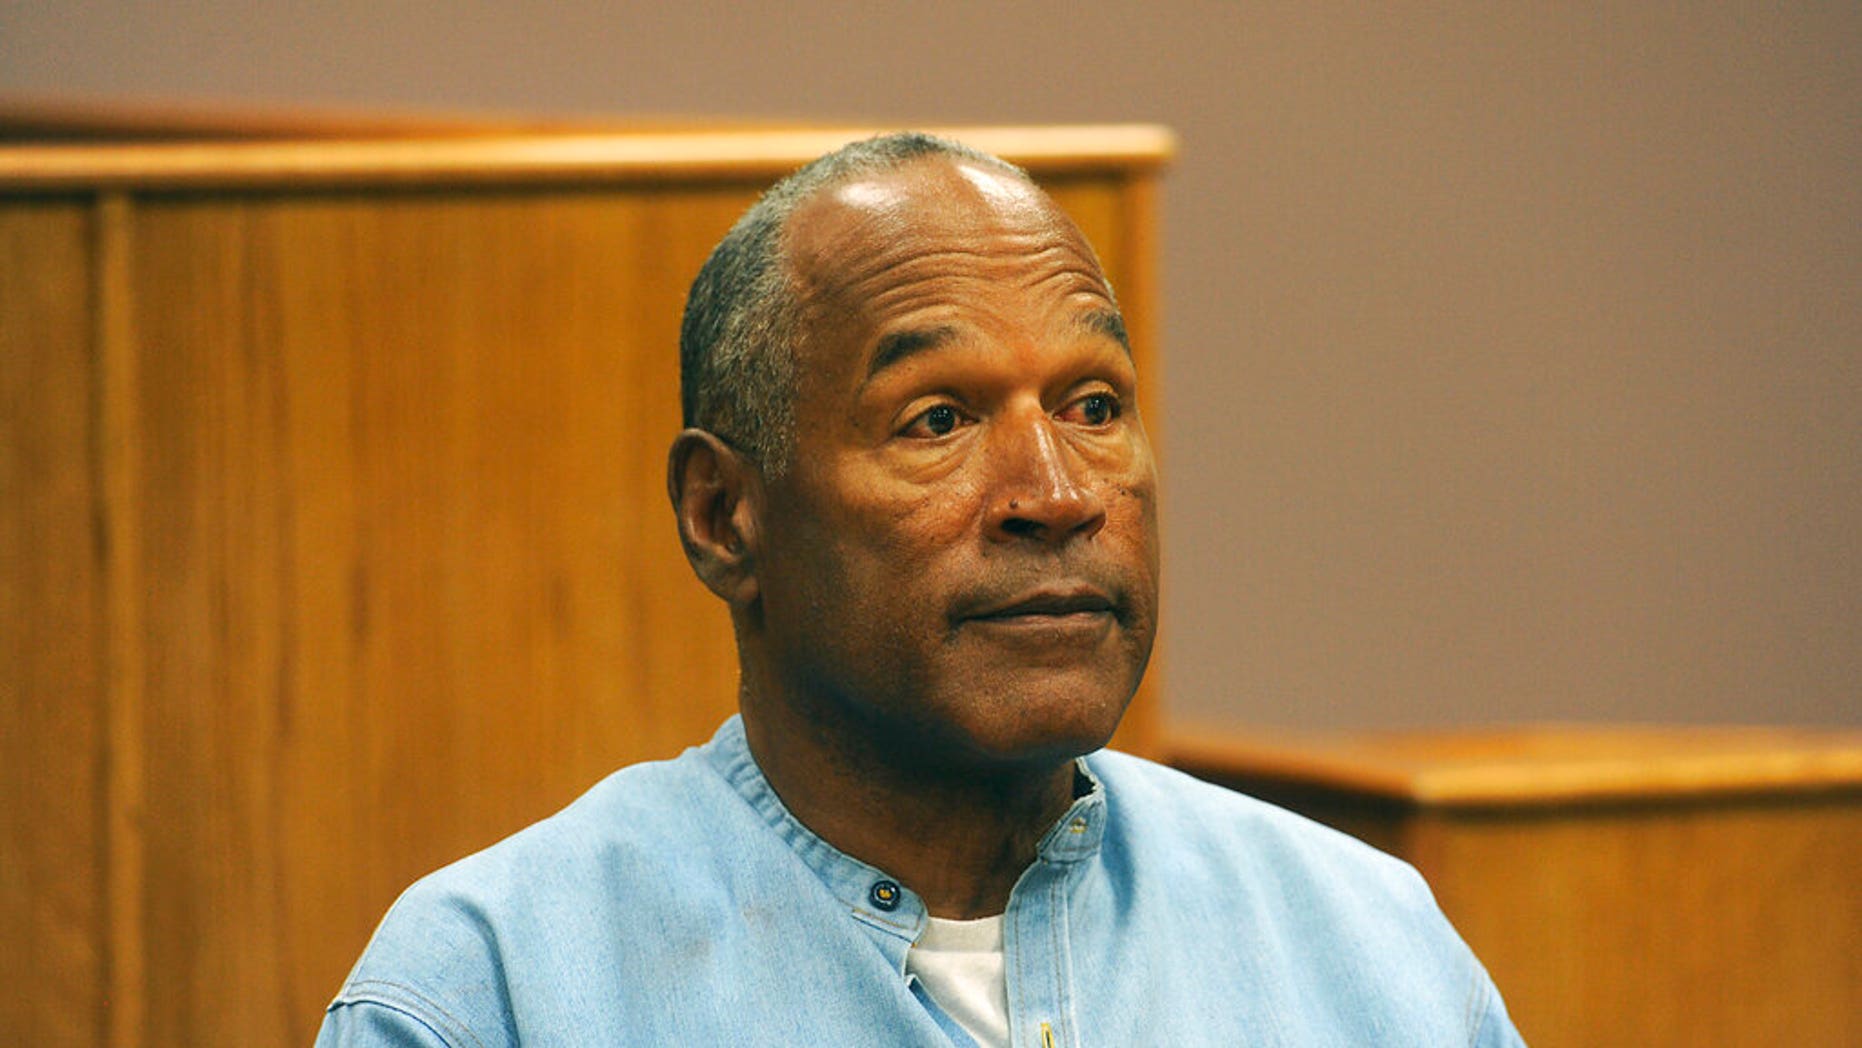 FILE: Former NFL footballer O.J. Simpson appears on video for his parole hearing at the Lovelock Correctional Center in Lovelock, Nev. 